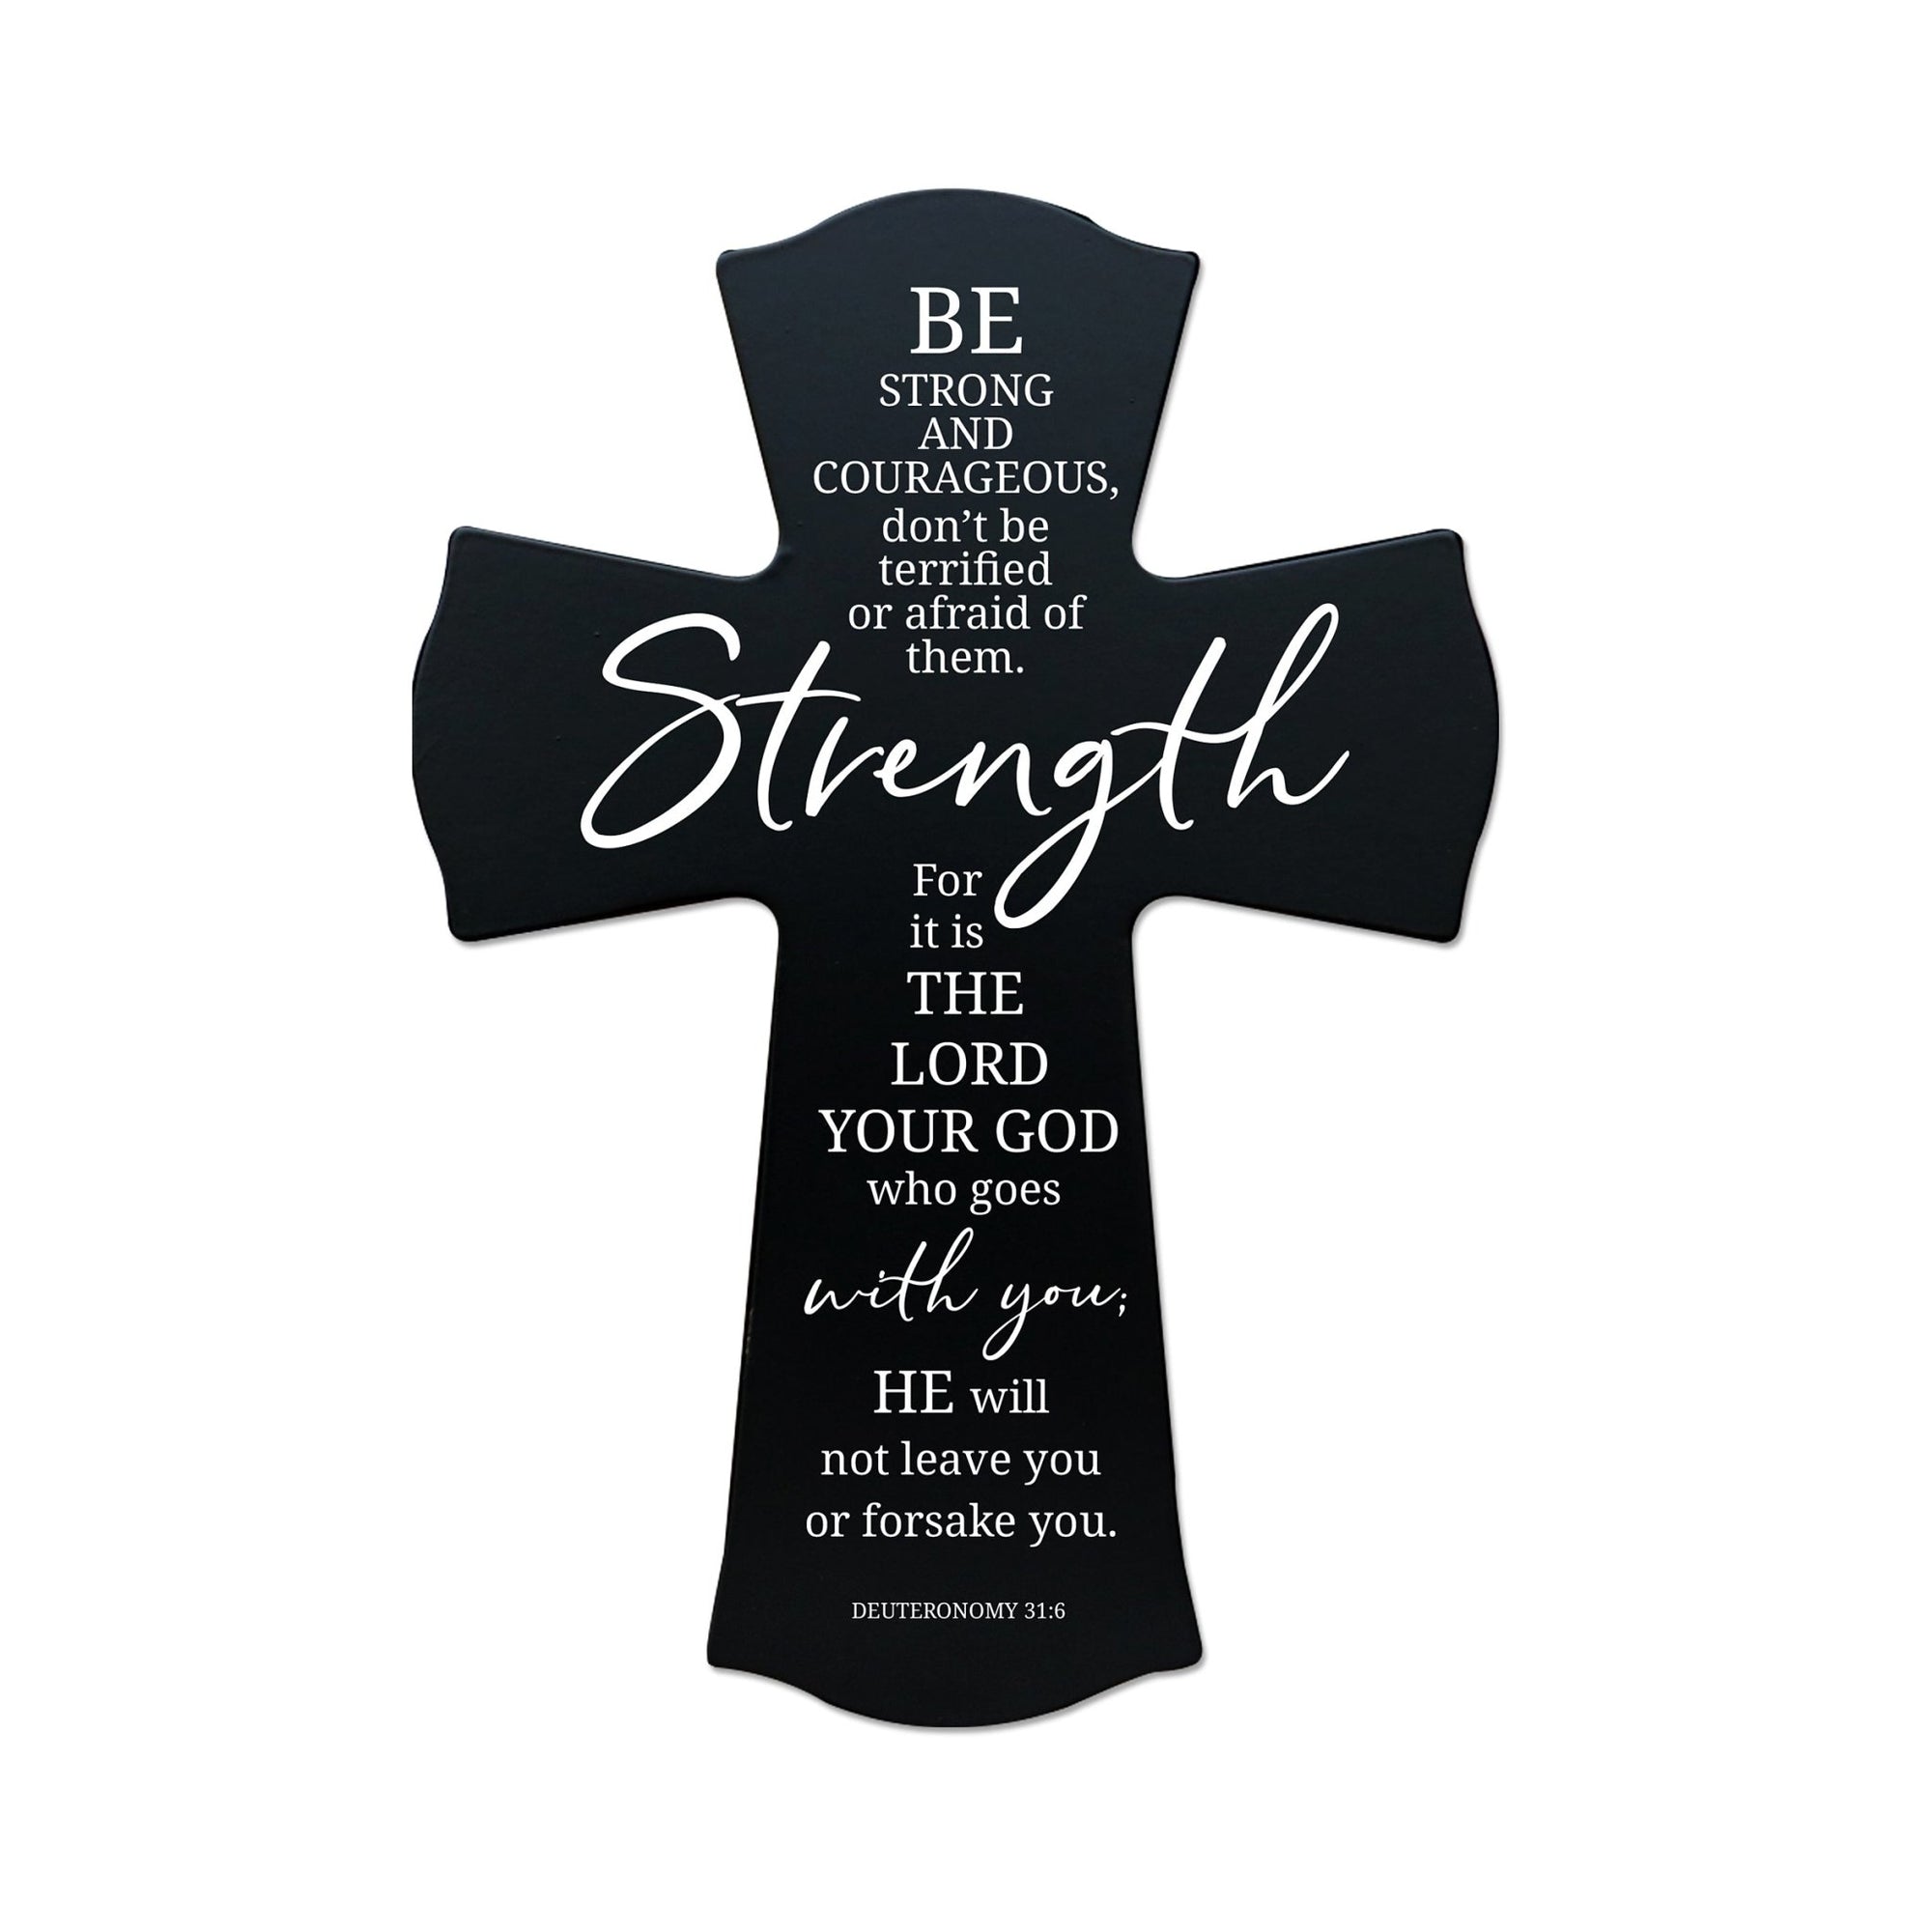 Every Day Wall Cross 8” x 11.25” - Be Strong and Courageous - LifeSong Milestones